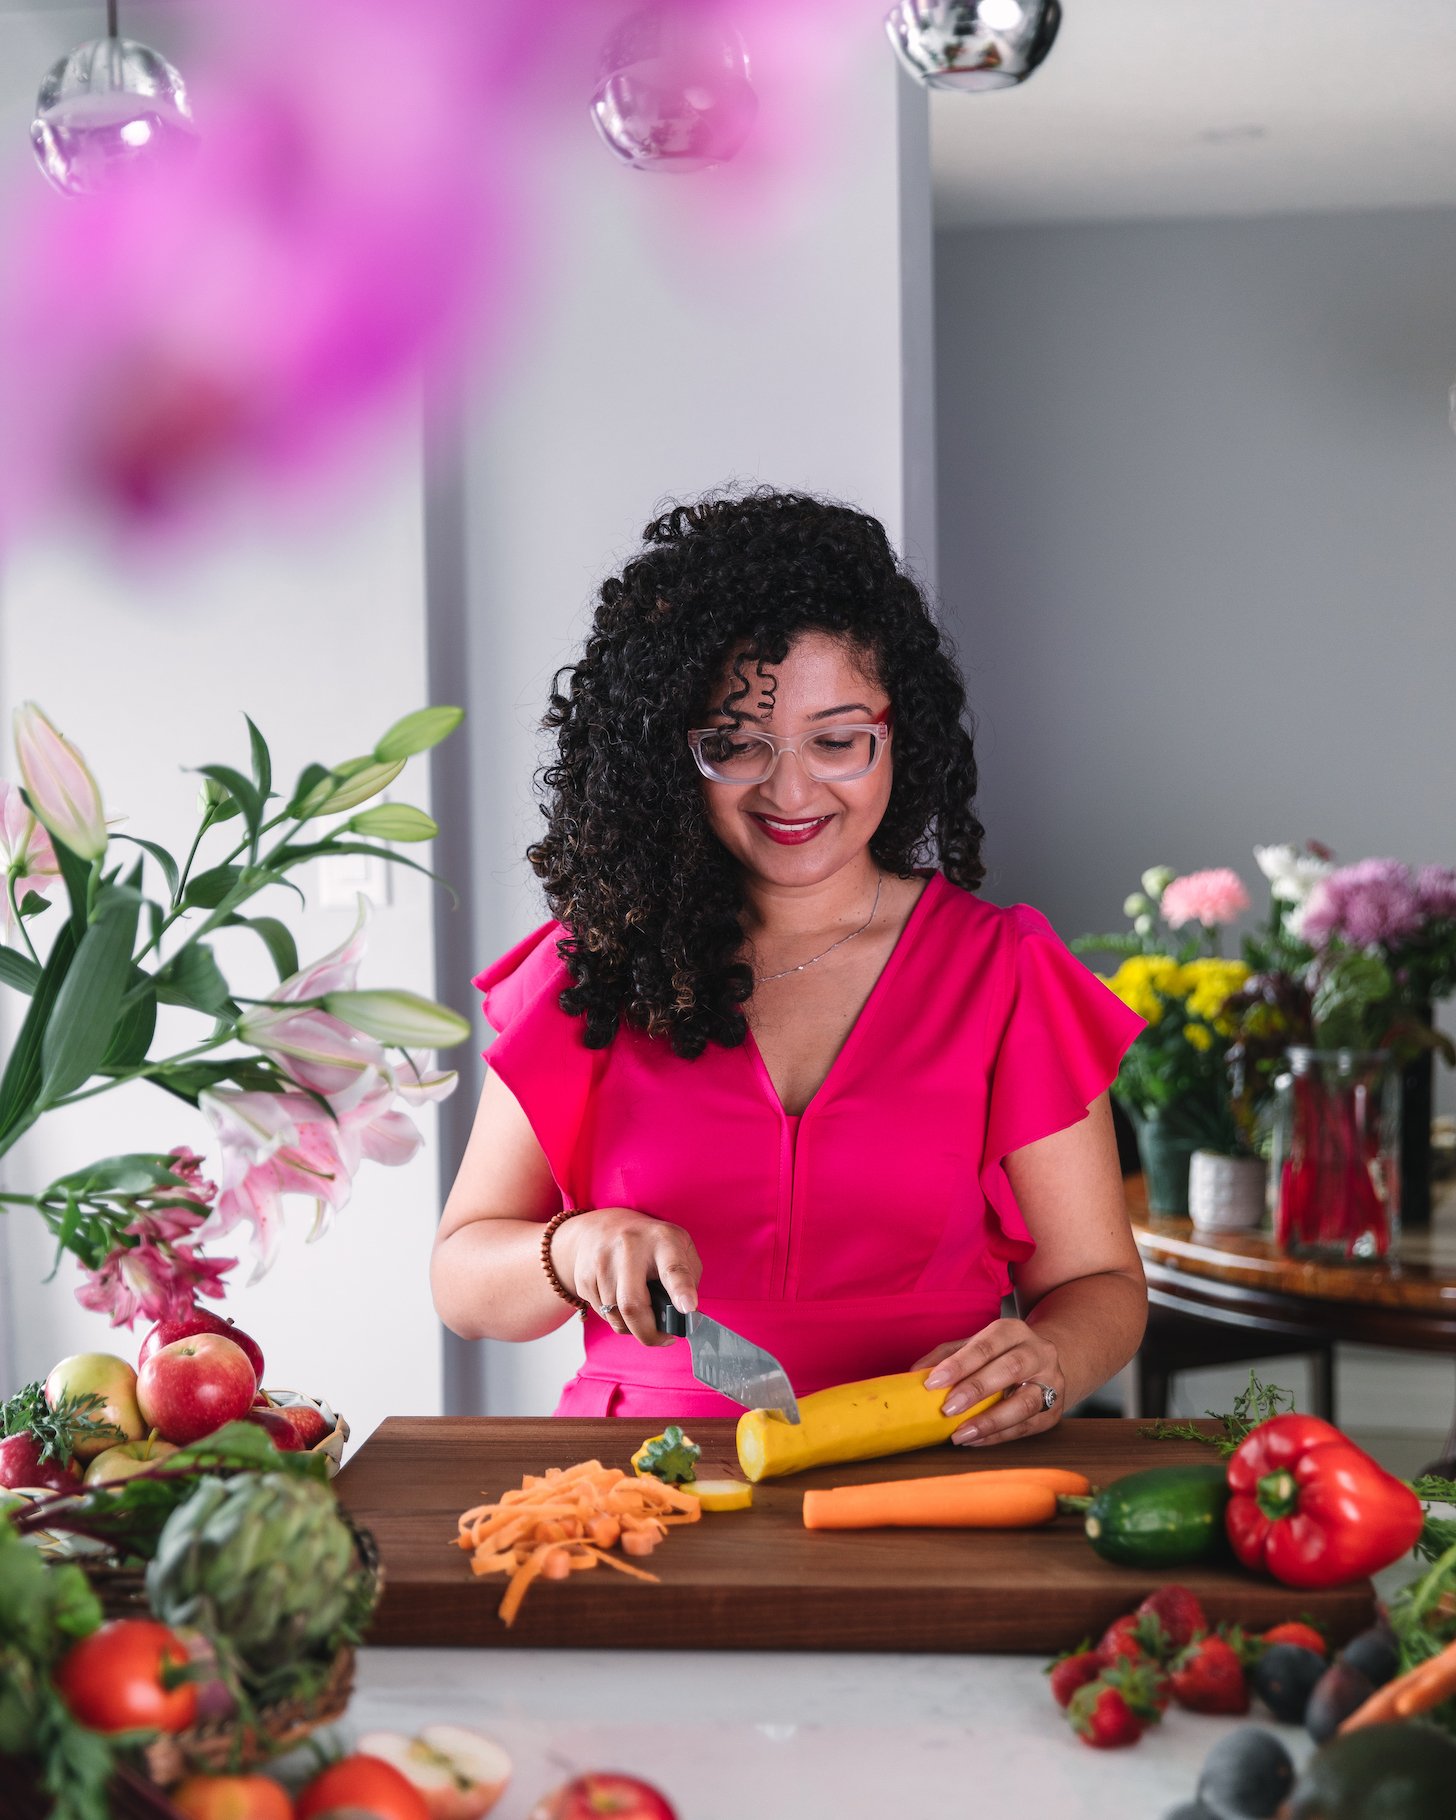 a curly haired lady in her kitchen chopping a yellow vegetable surrounded by food and flowers.